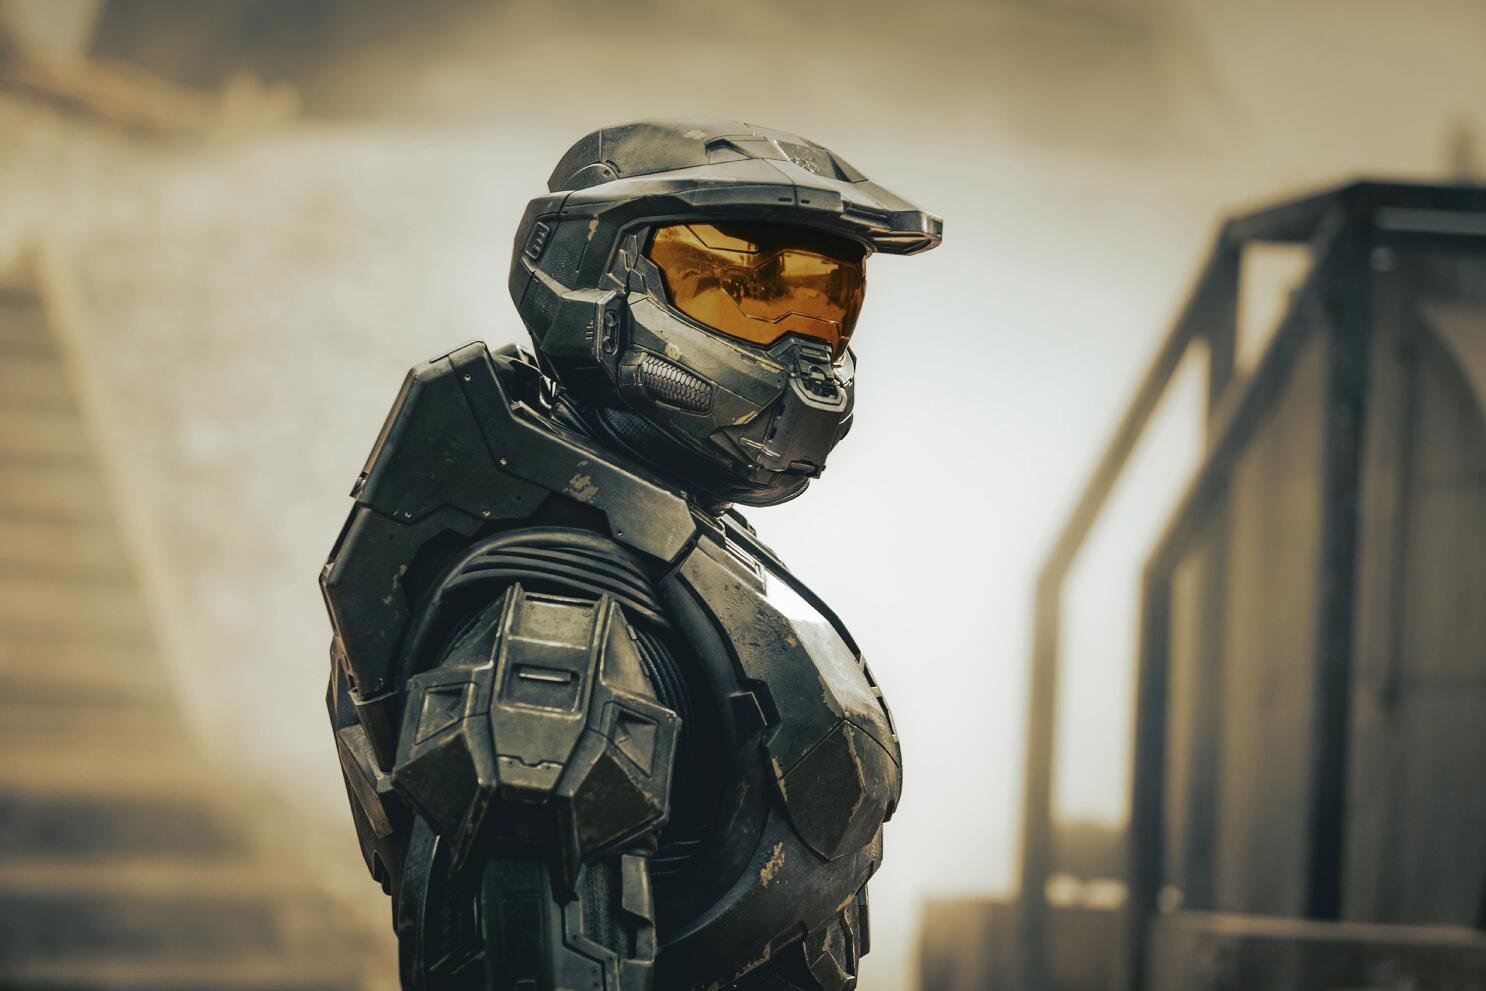 How the 'Halo' TV series misunderstands the video game's fans